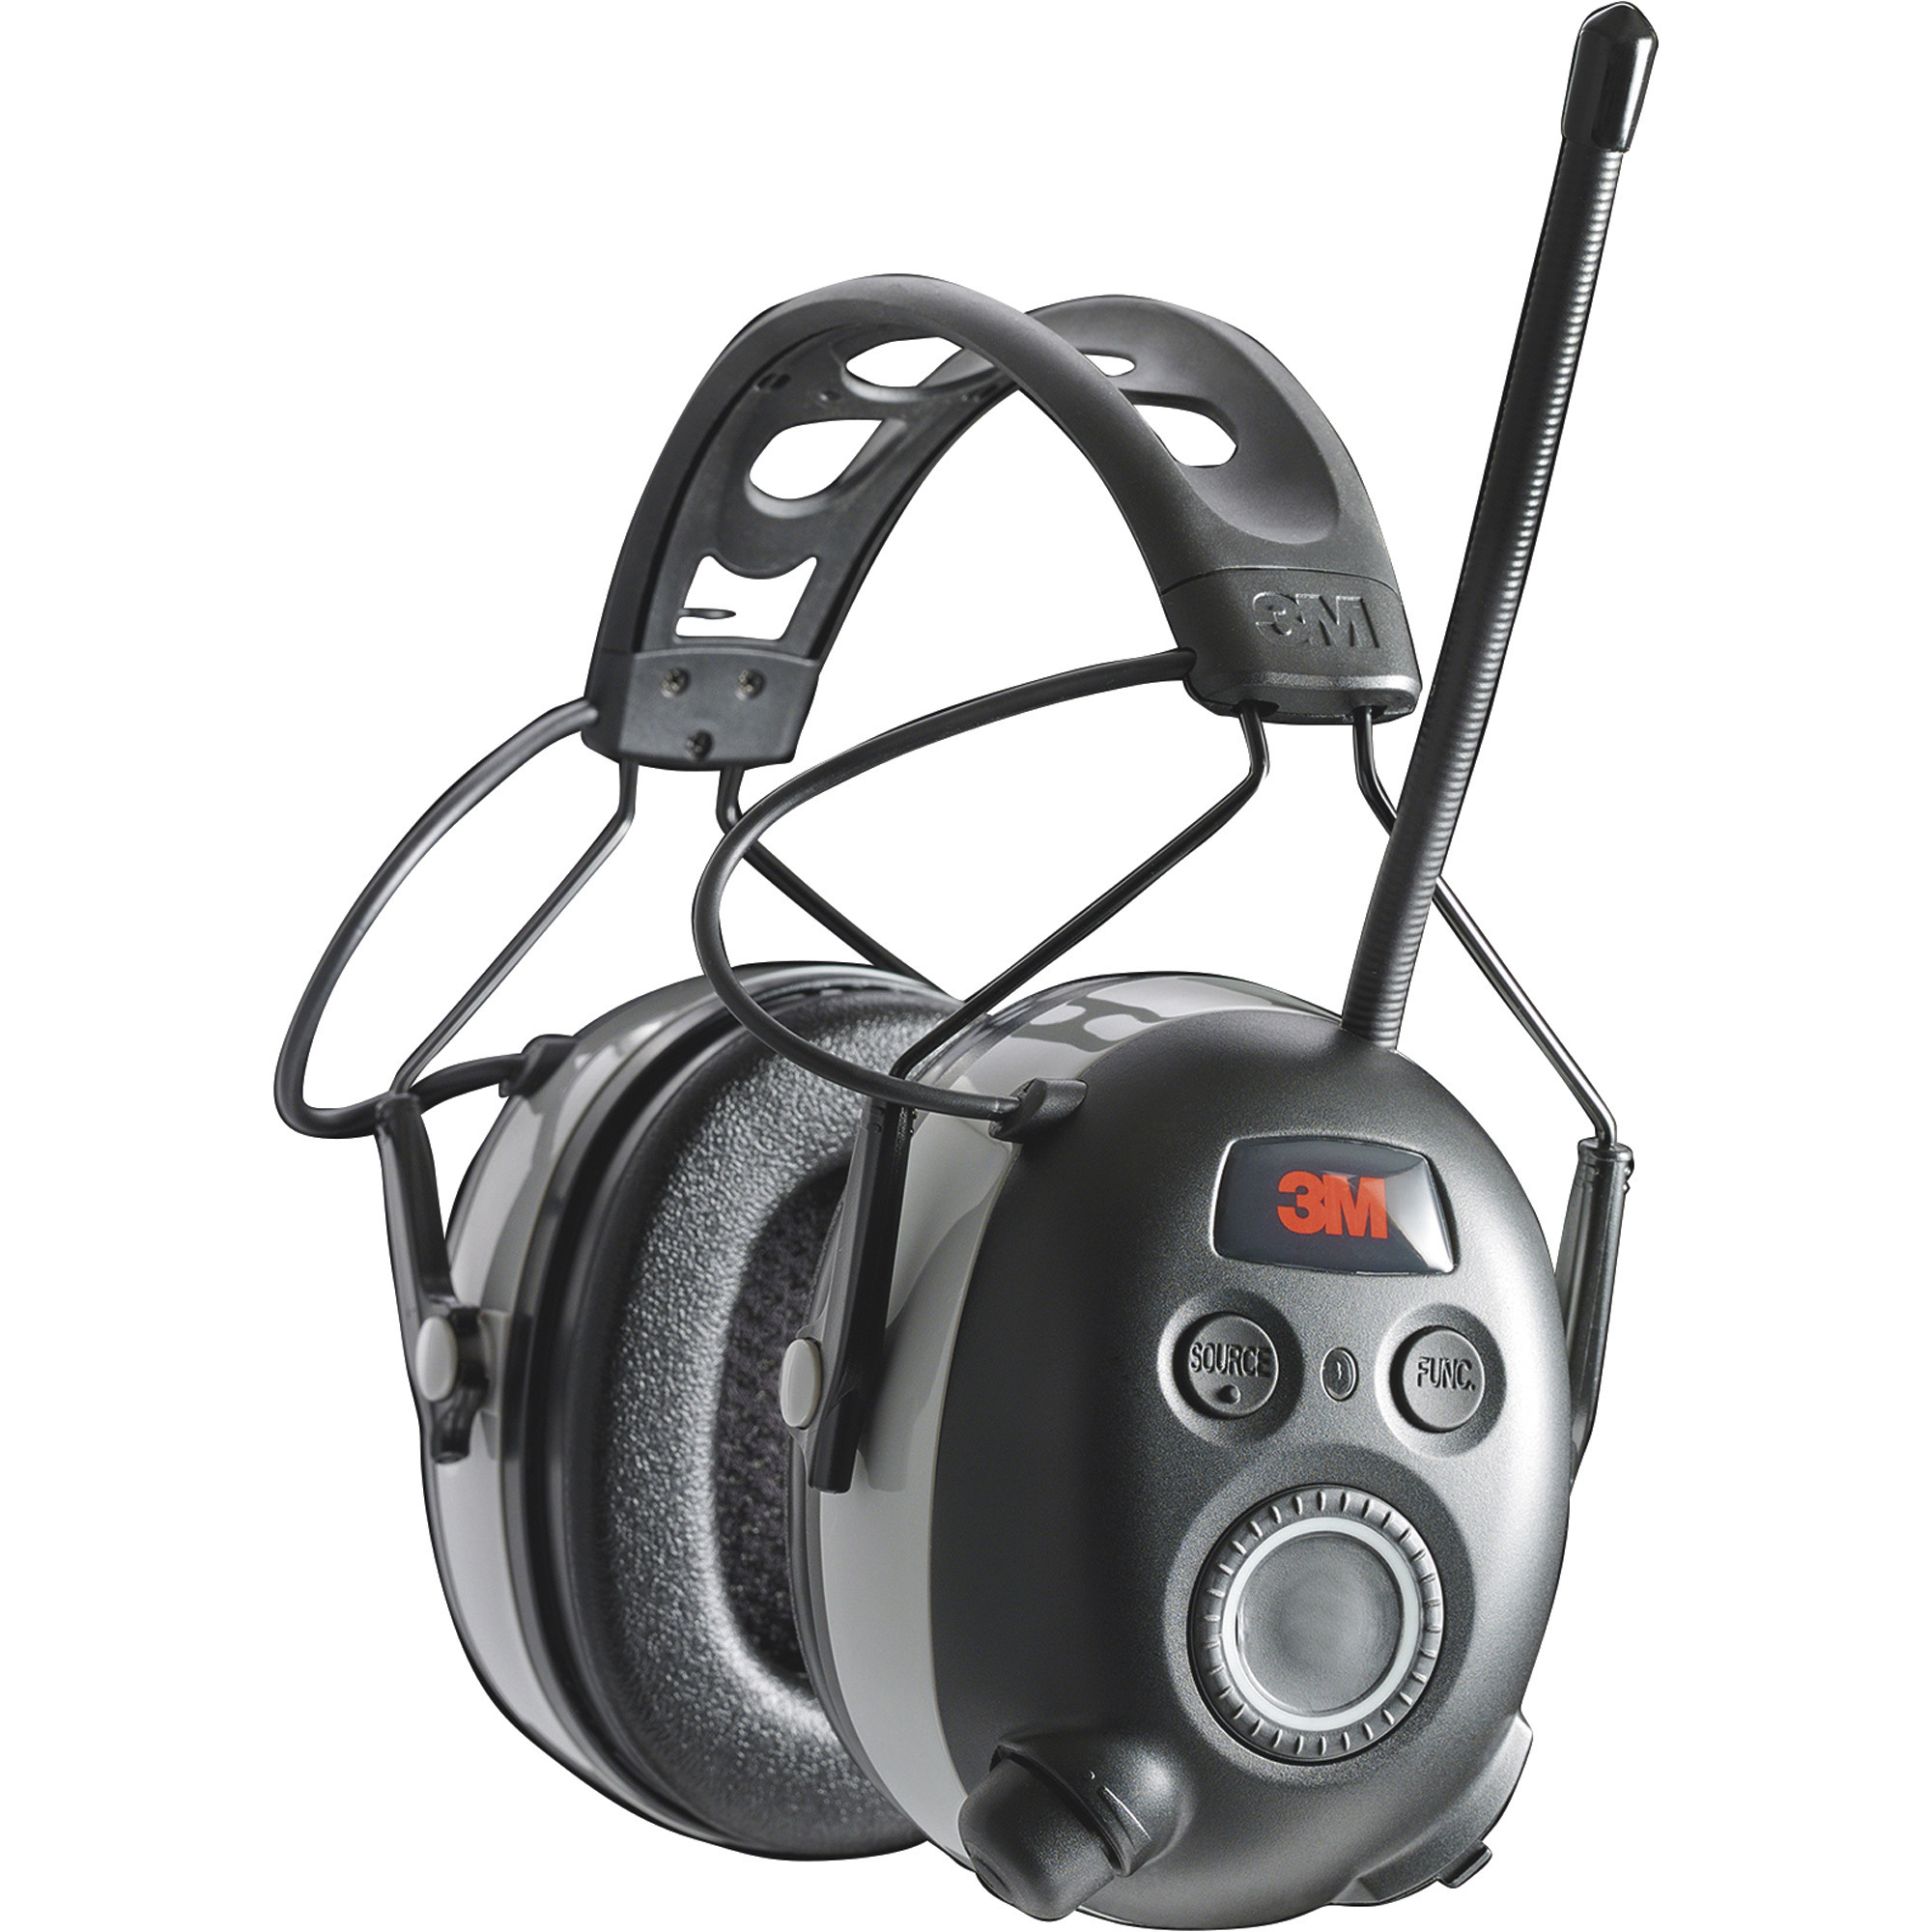 3M WorkTunes Connect AM/FM Radio/MP3 Hearing Protector with Bluetooth Technology, NRR 24dB, Model 90542-3DC